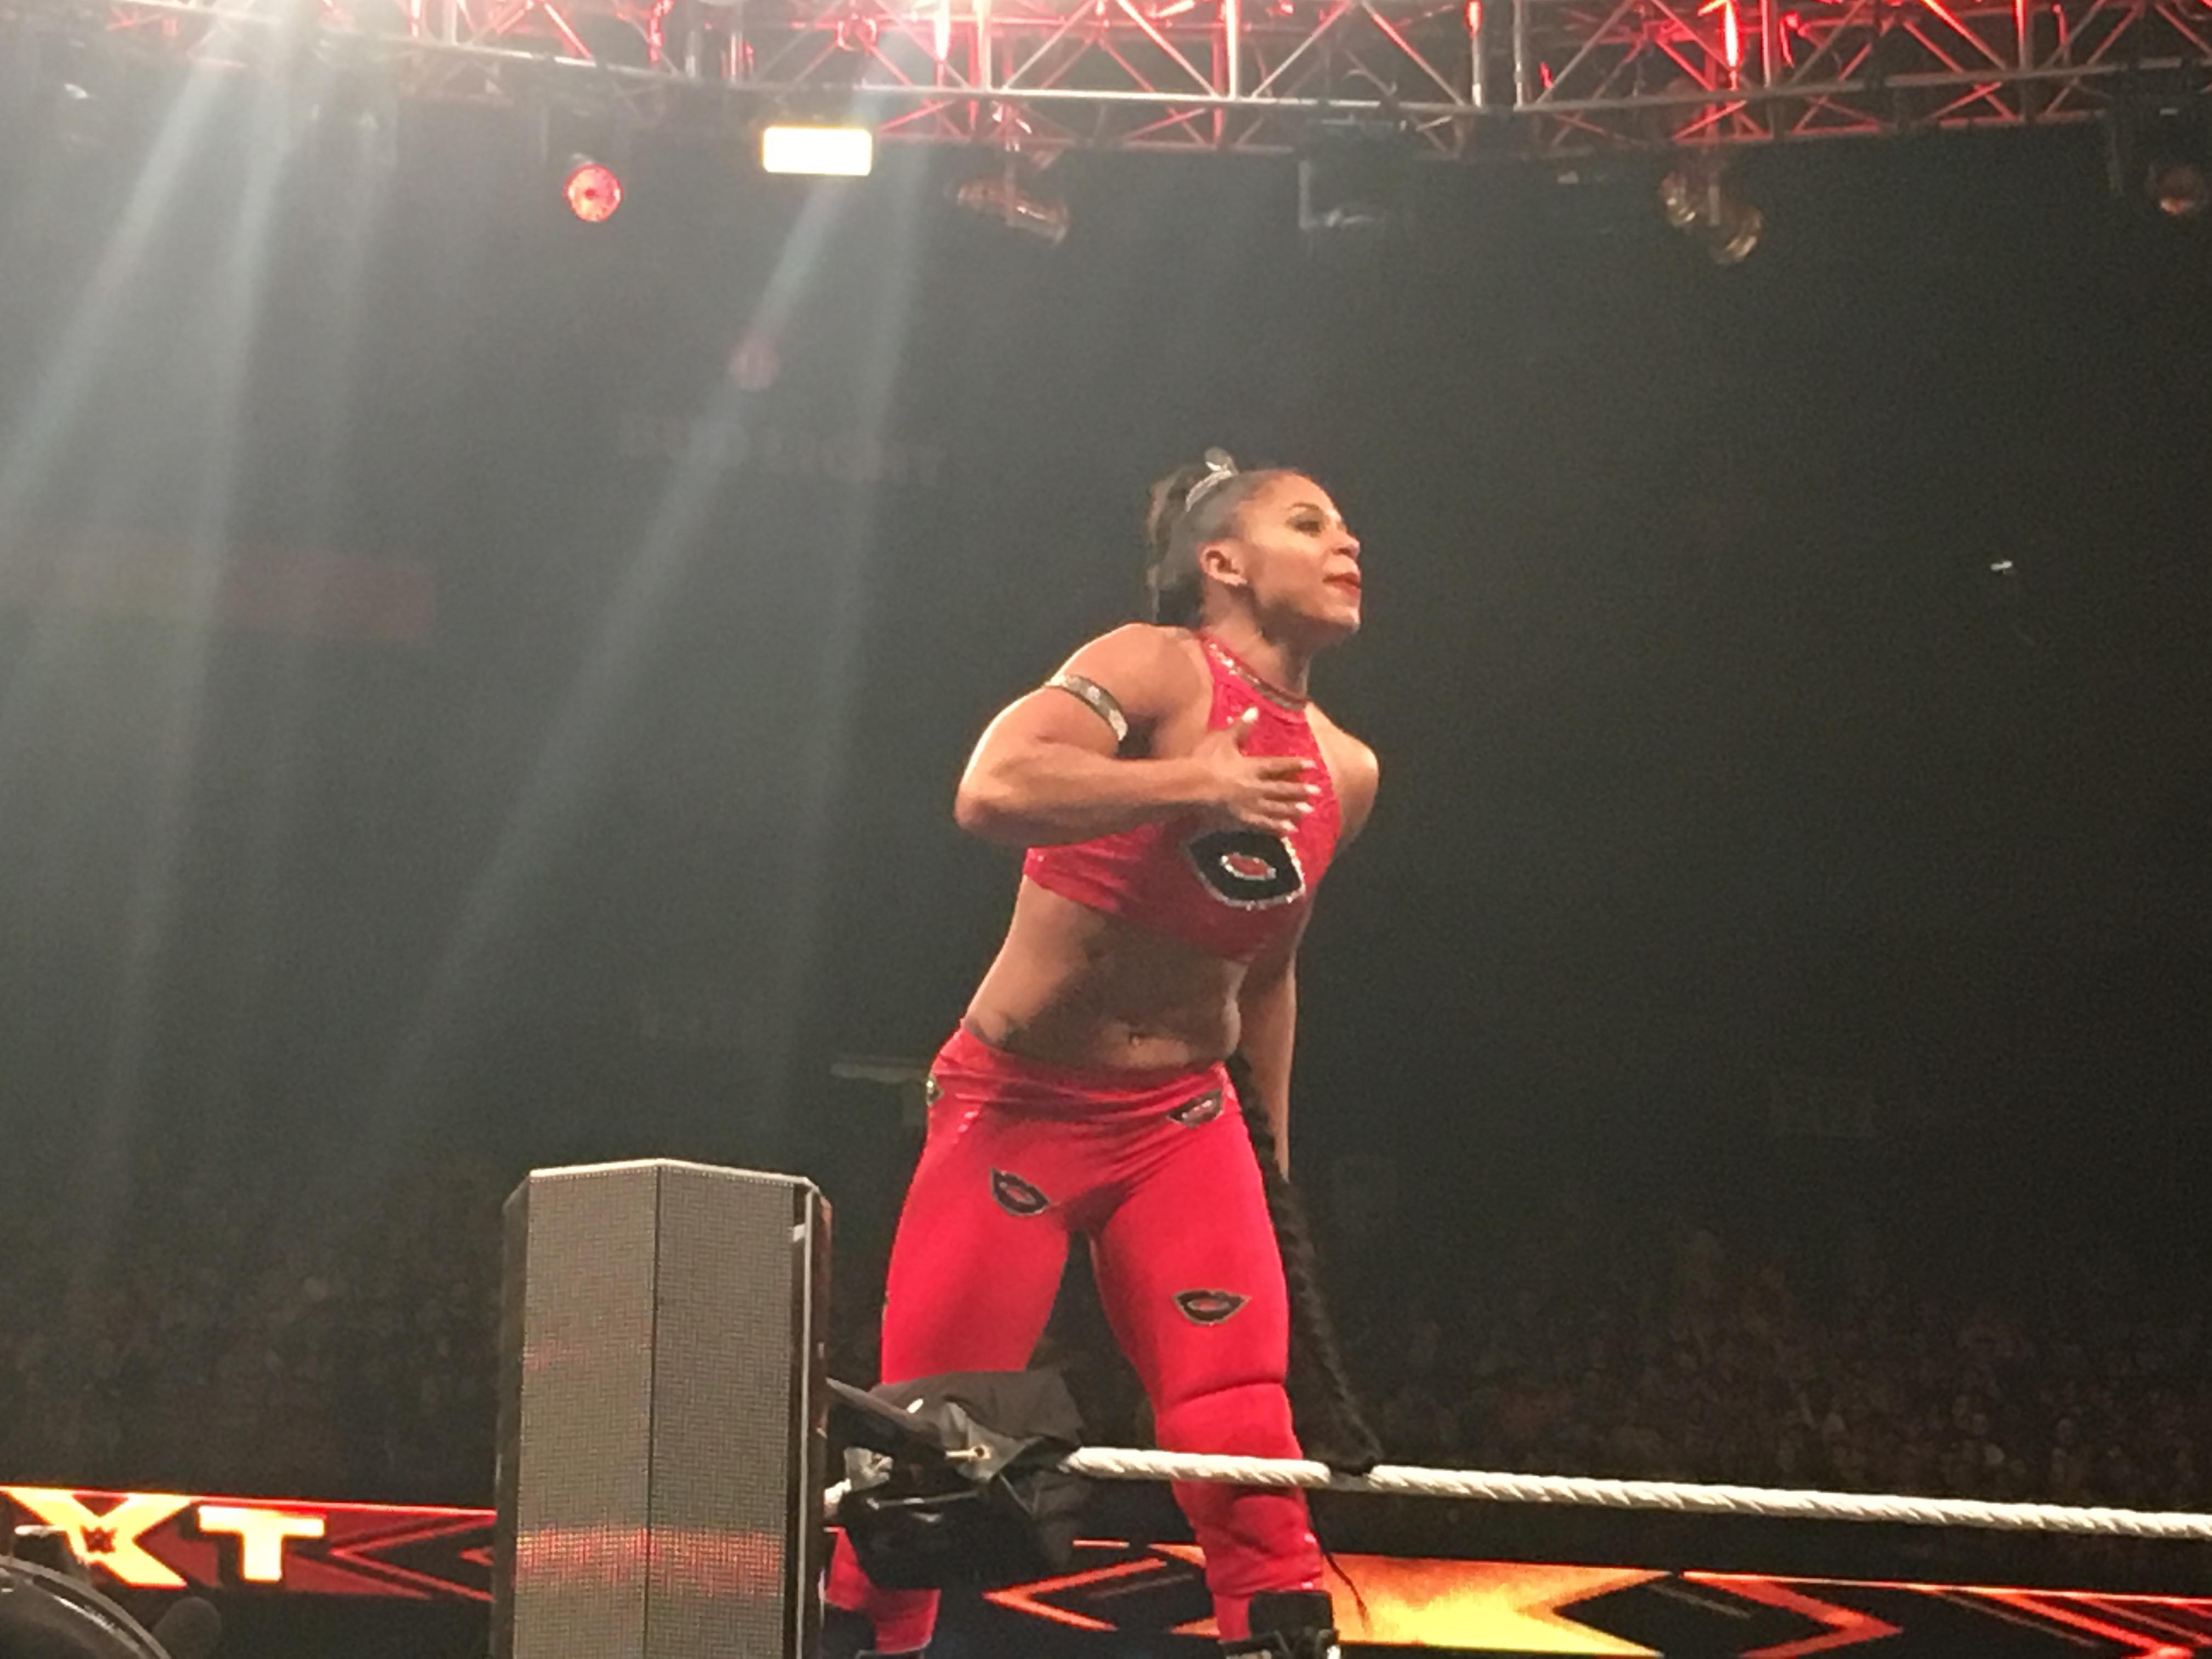 NXT 'Takeover: Chicago' 2018